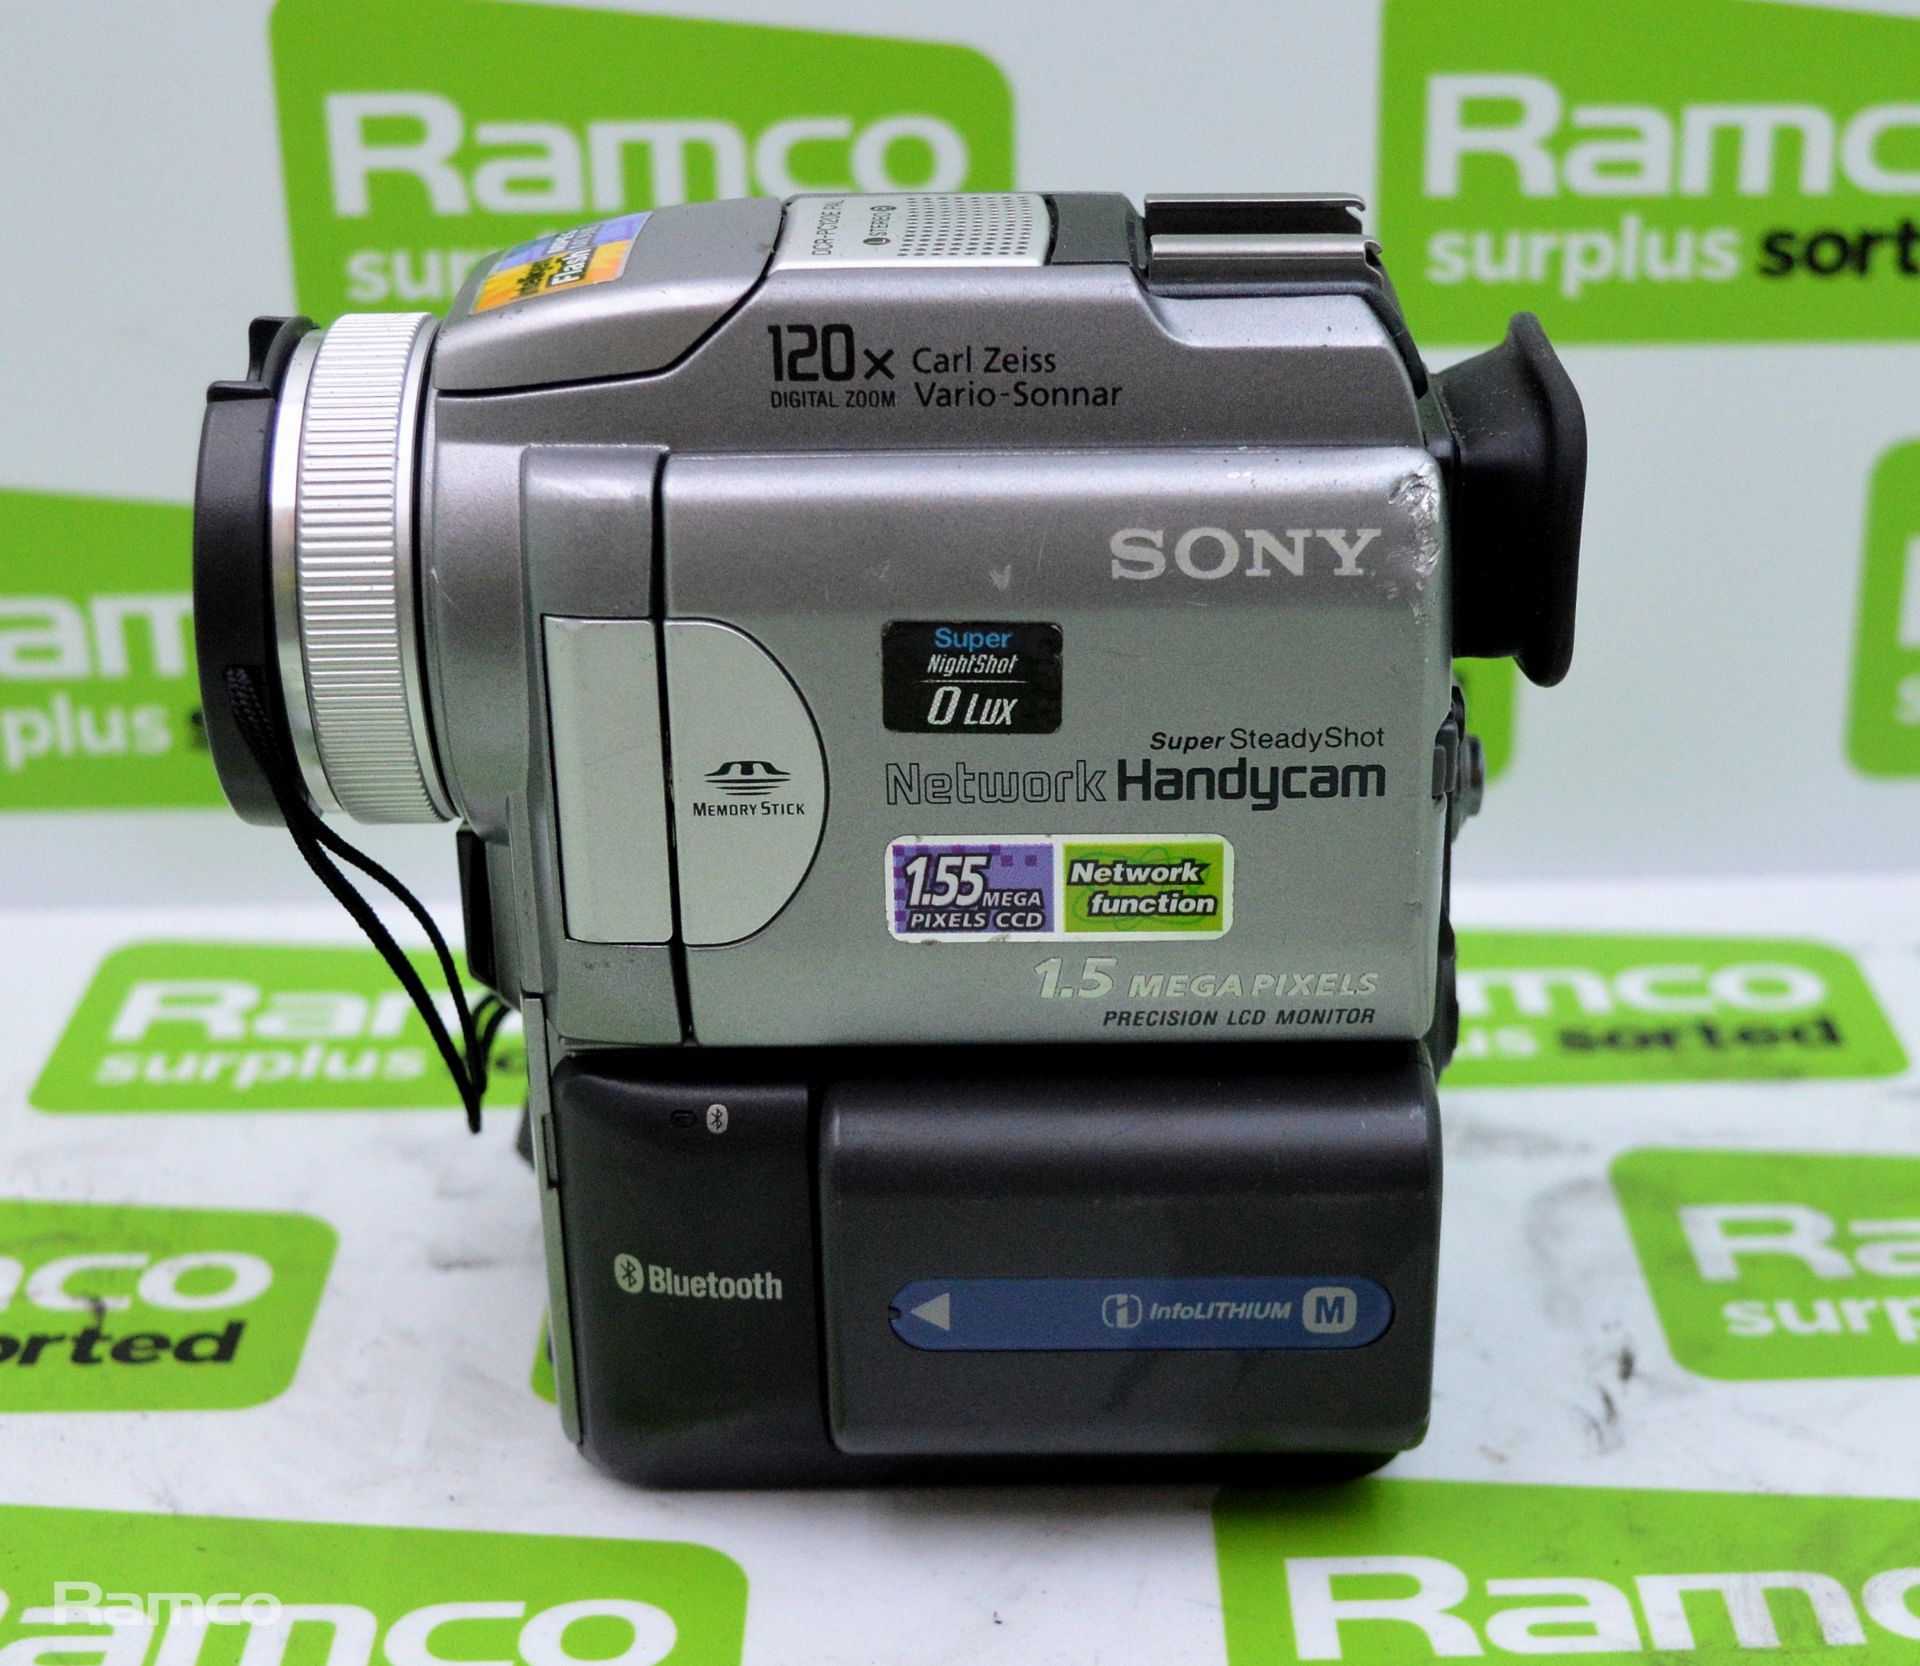 Sony DCR-PC120E Video Camcorder With Accessories In Case - Image 2 of 6